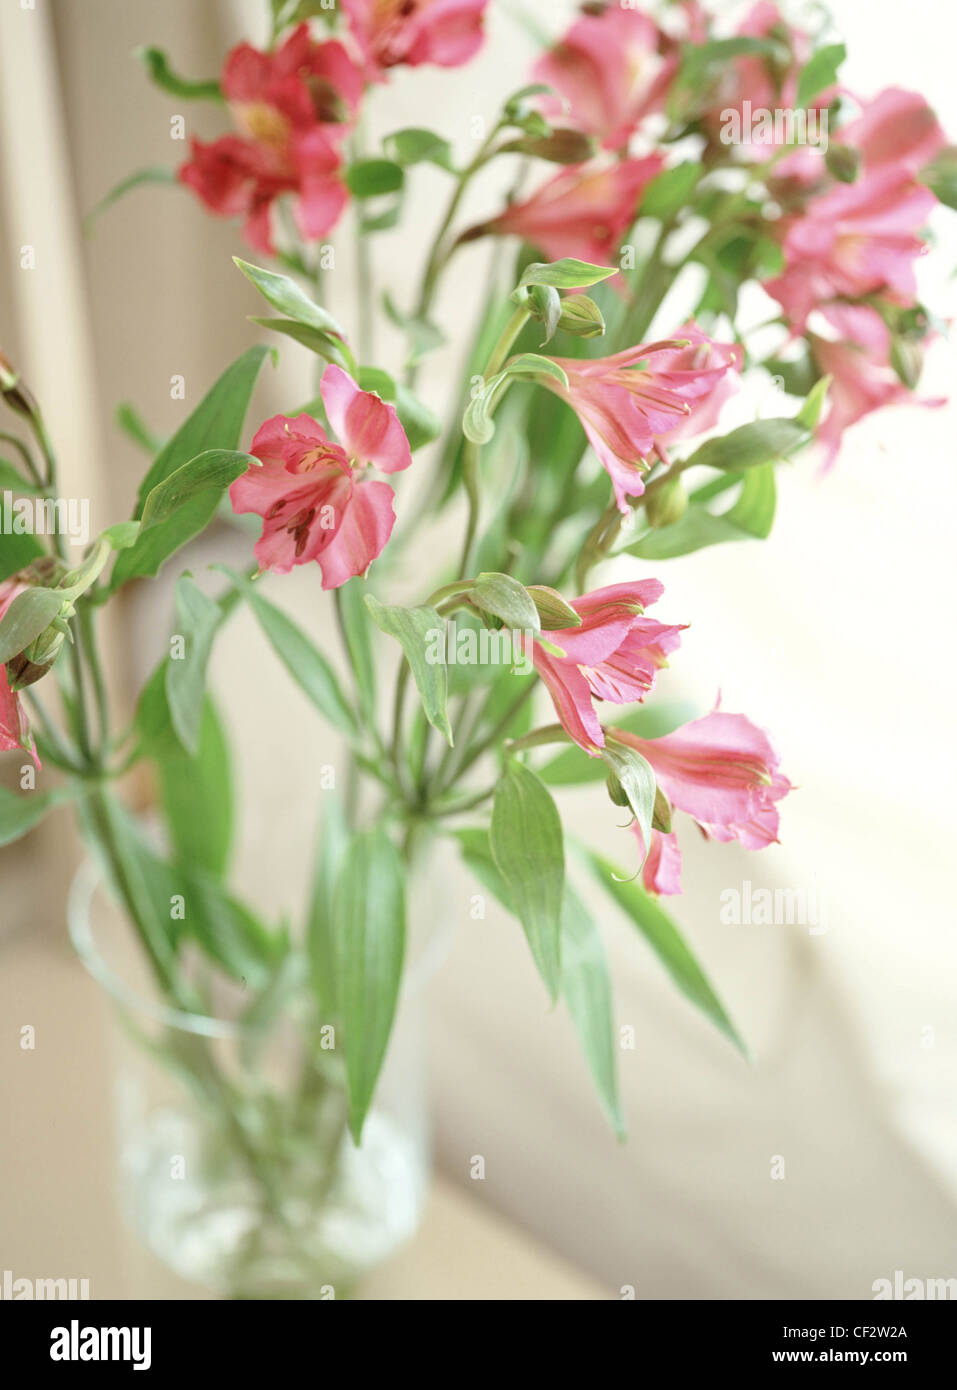 Detail of pink tiger lillies in glass vase next to window Stock Photo